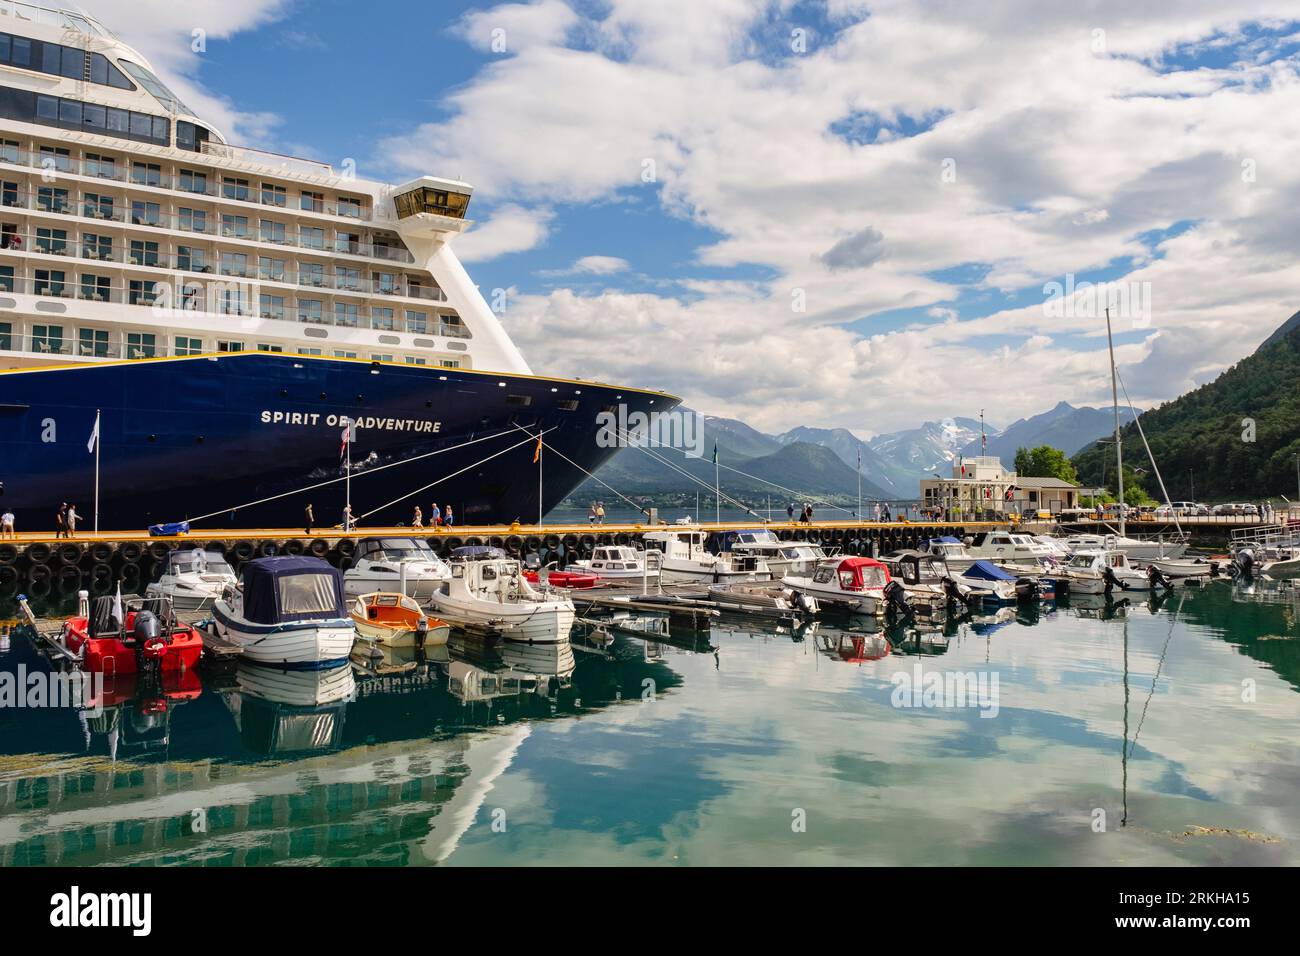 Saga cruise ship and small boats moored by jetty in Tindekaia harbour in Romsdalsfjorden fjord in summer. Andalsnes, Møre og Romsdal, Norway Stock Photo